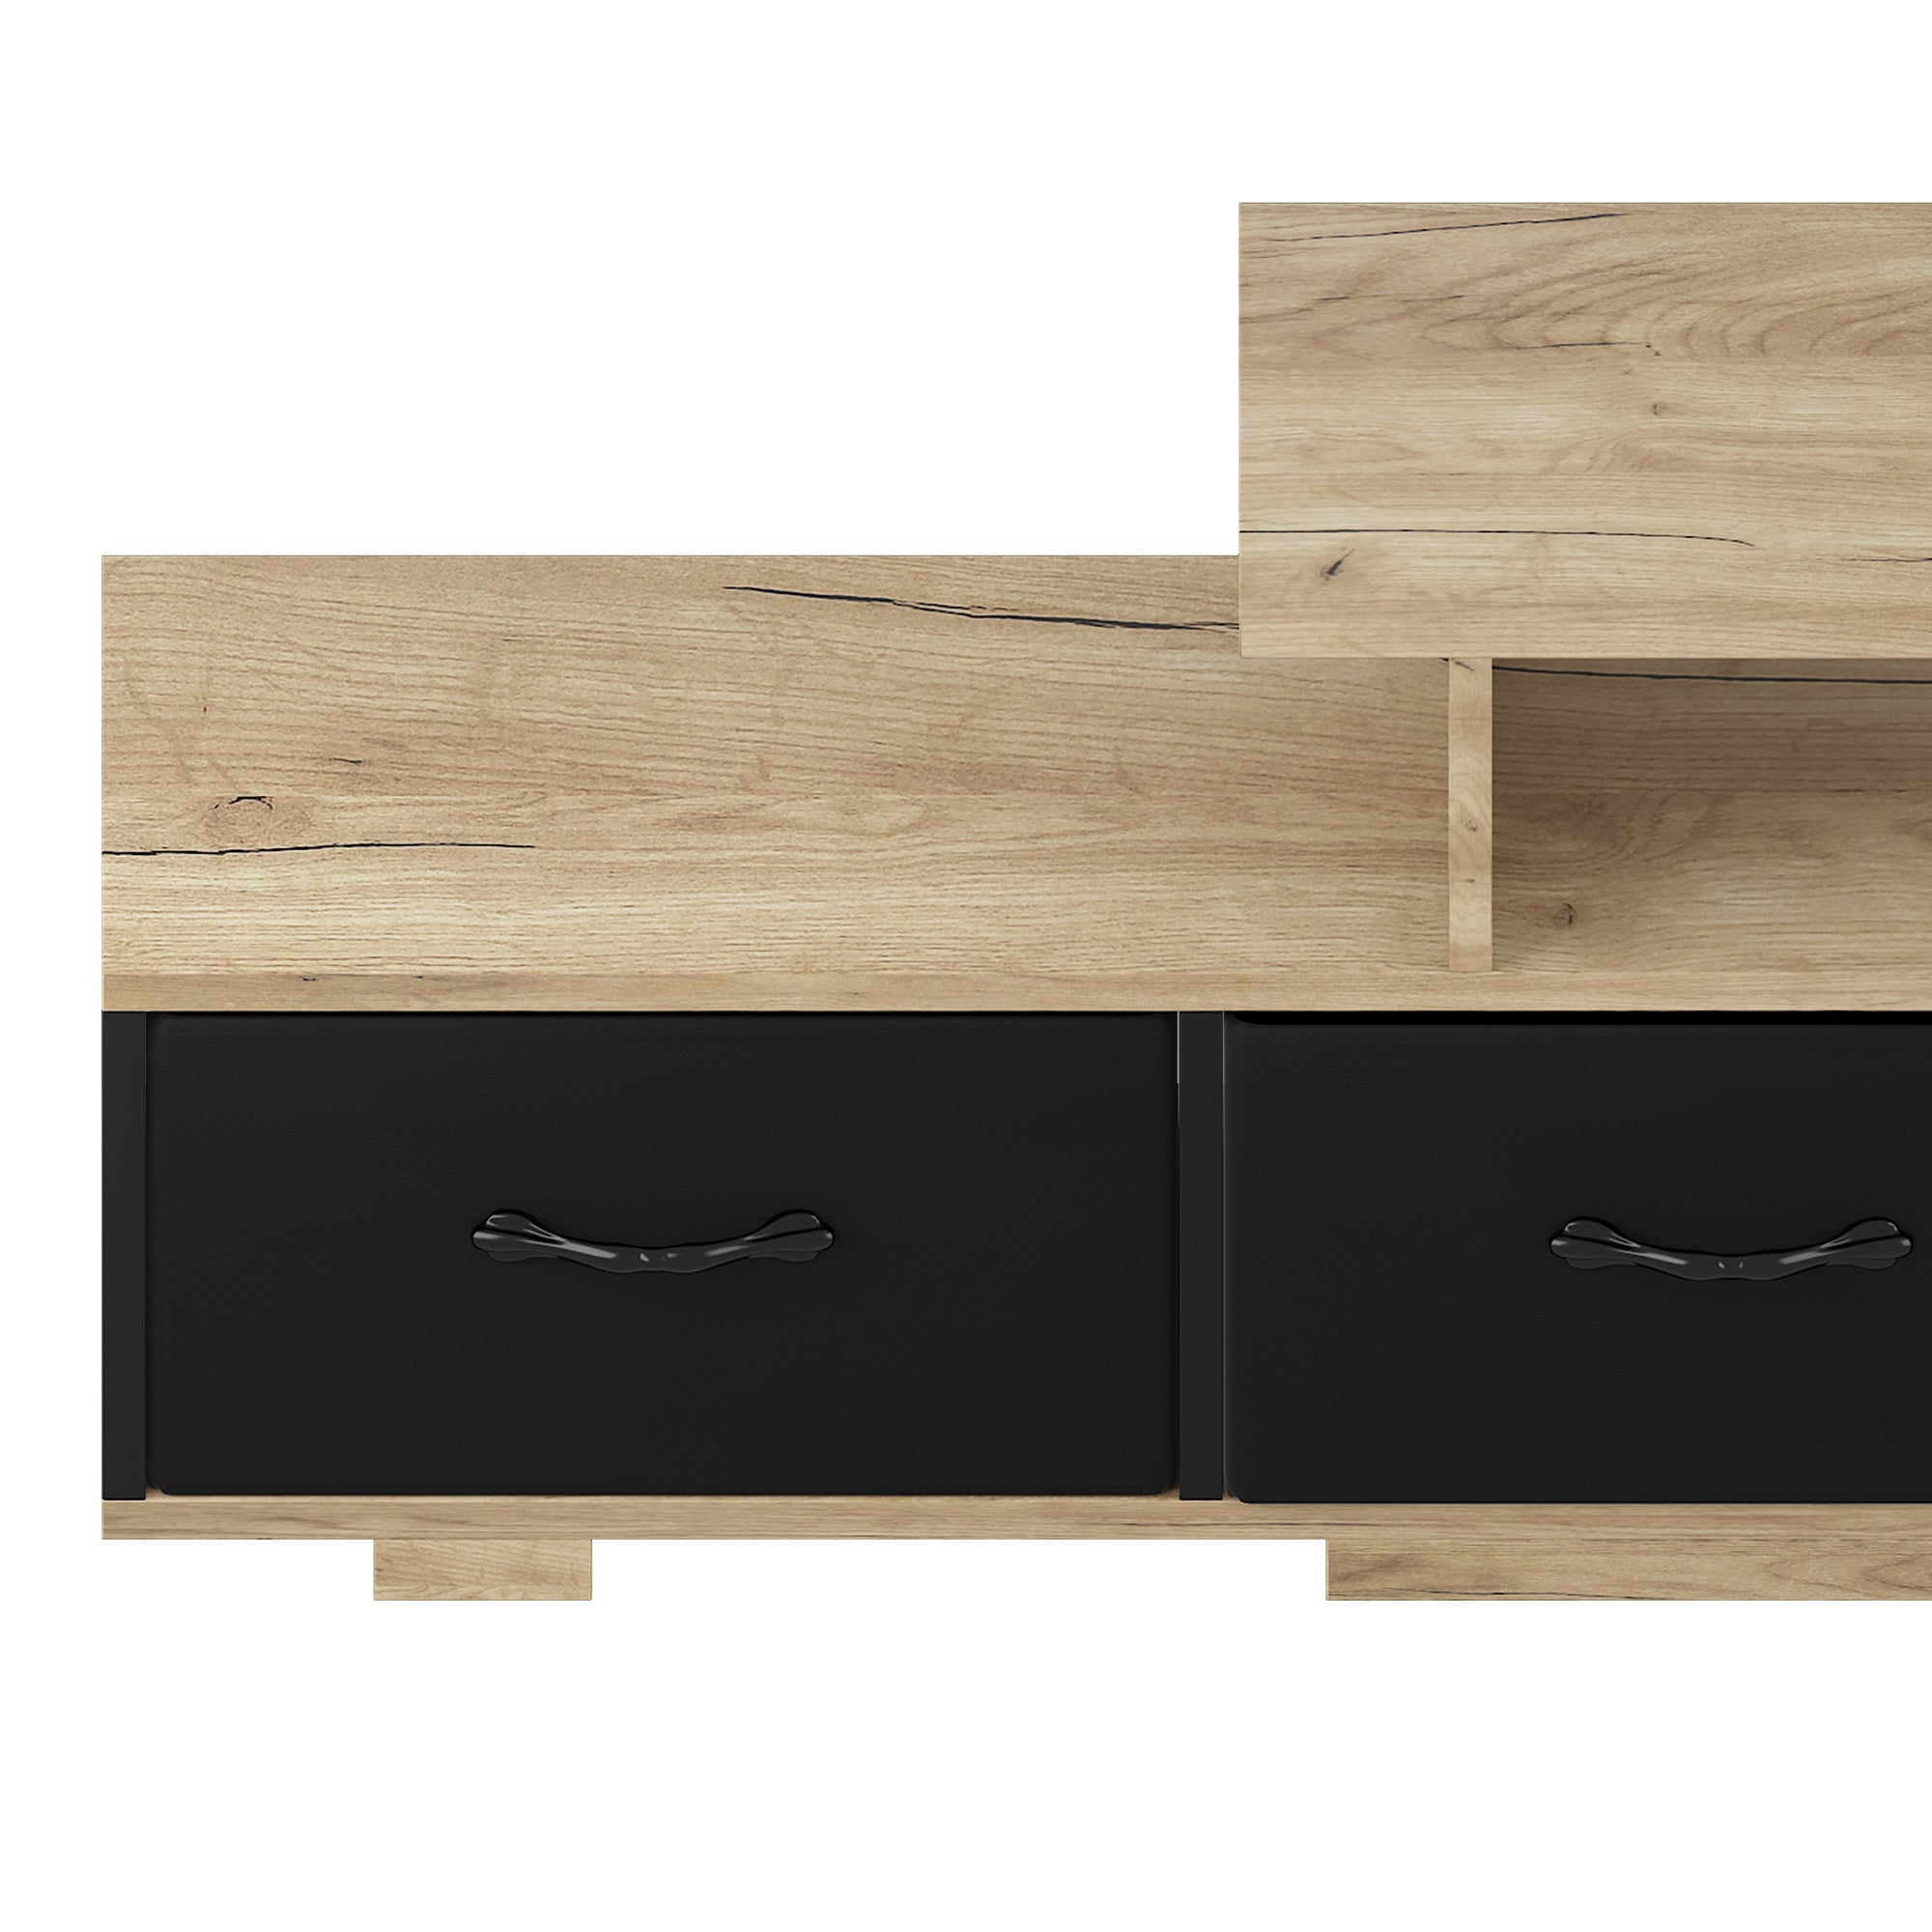 Black TV unit with wood texture